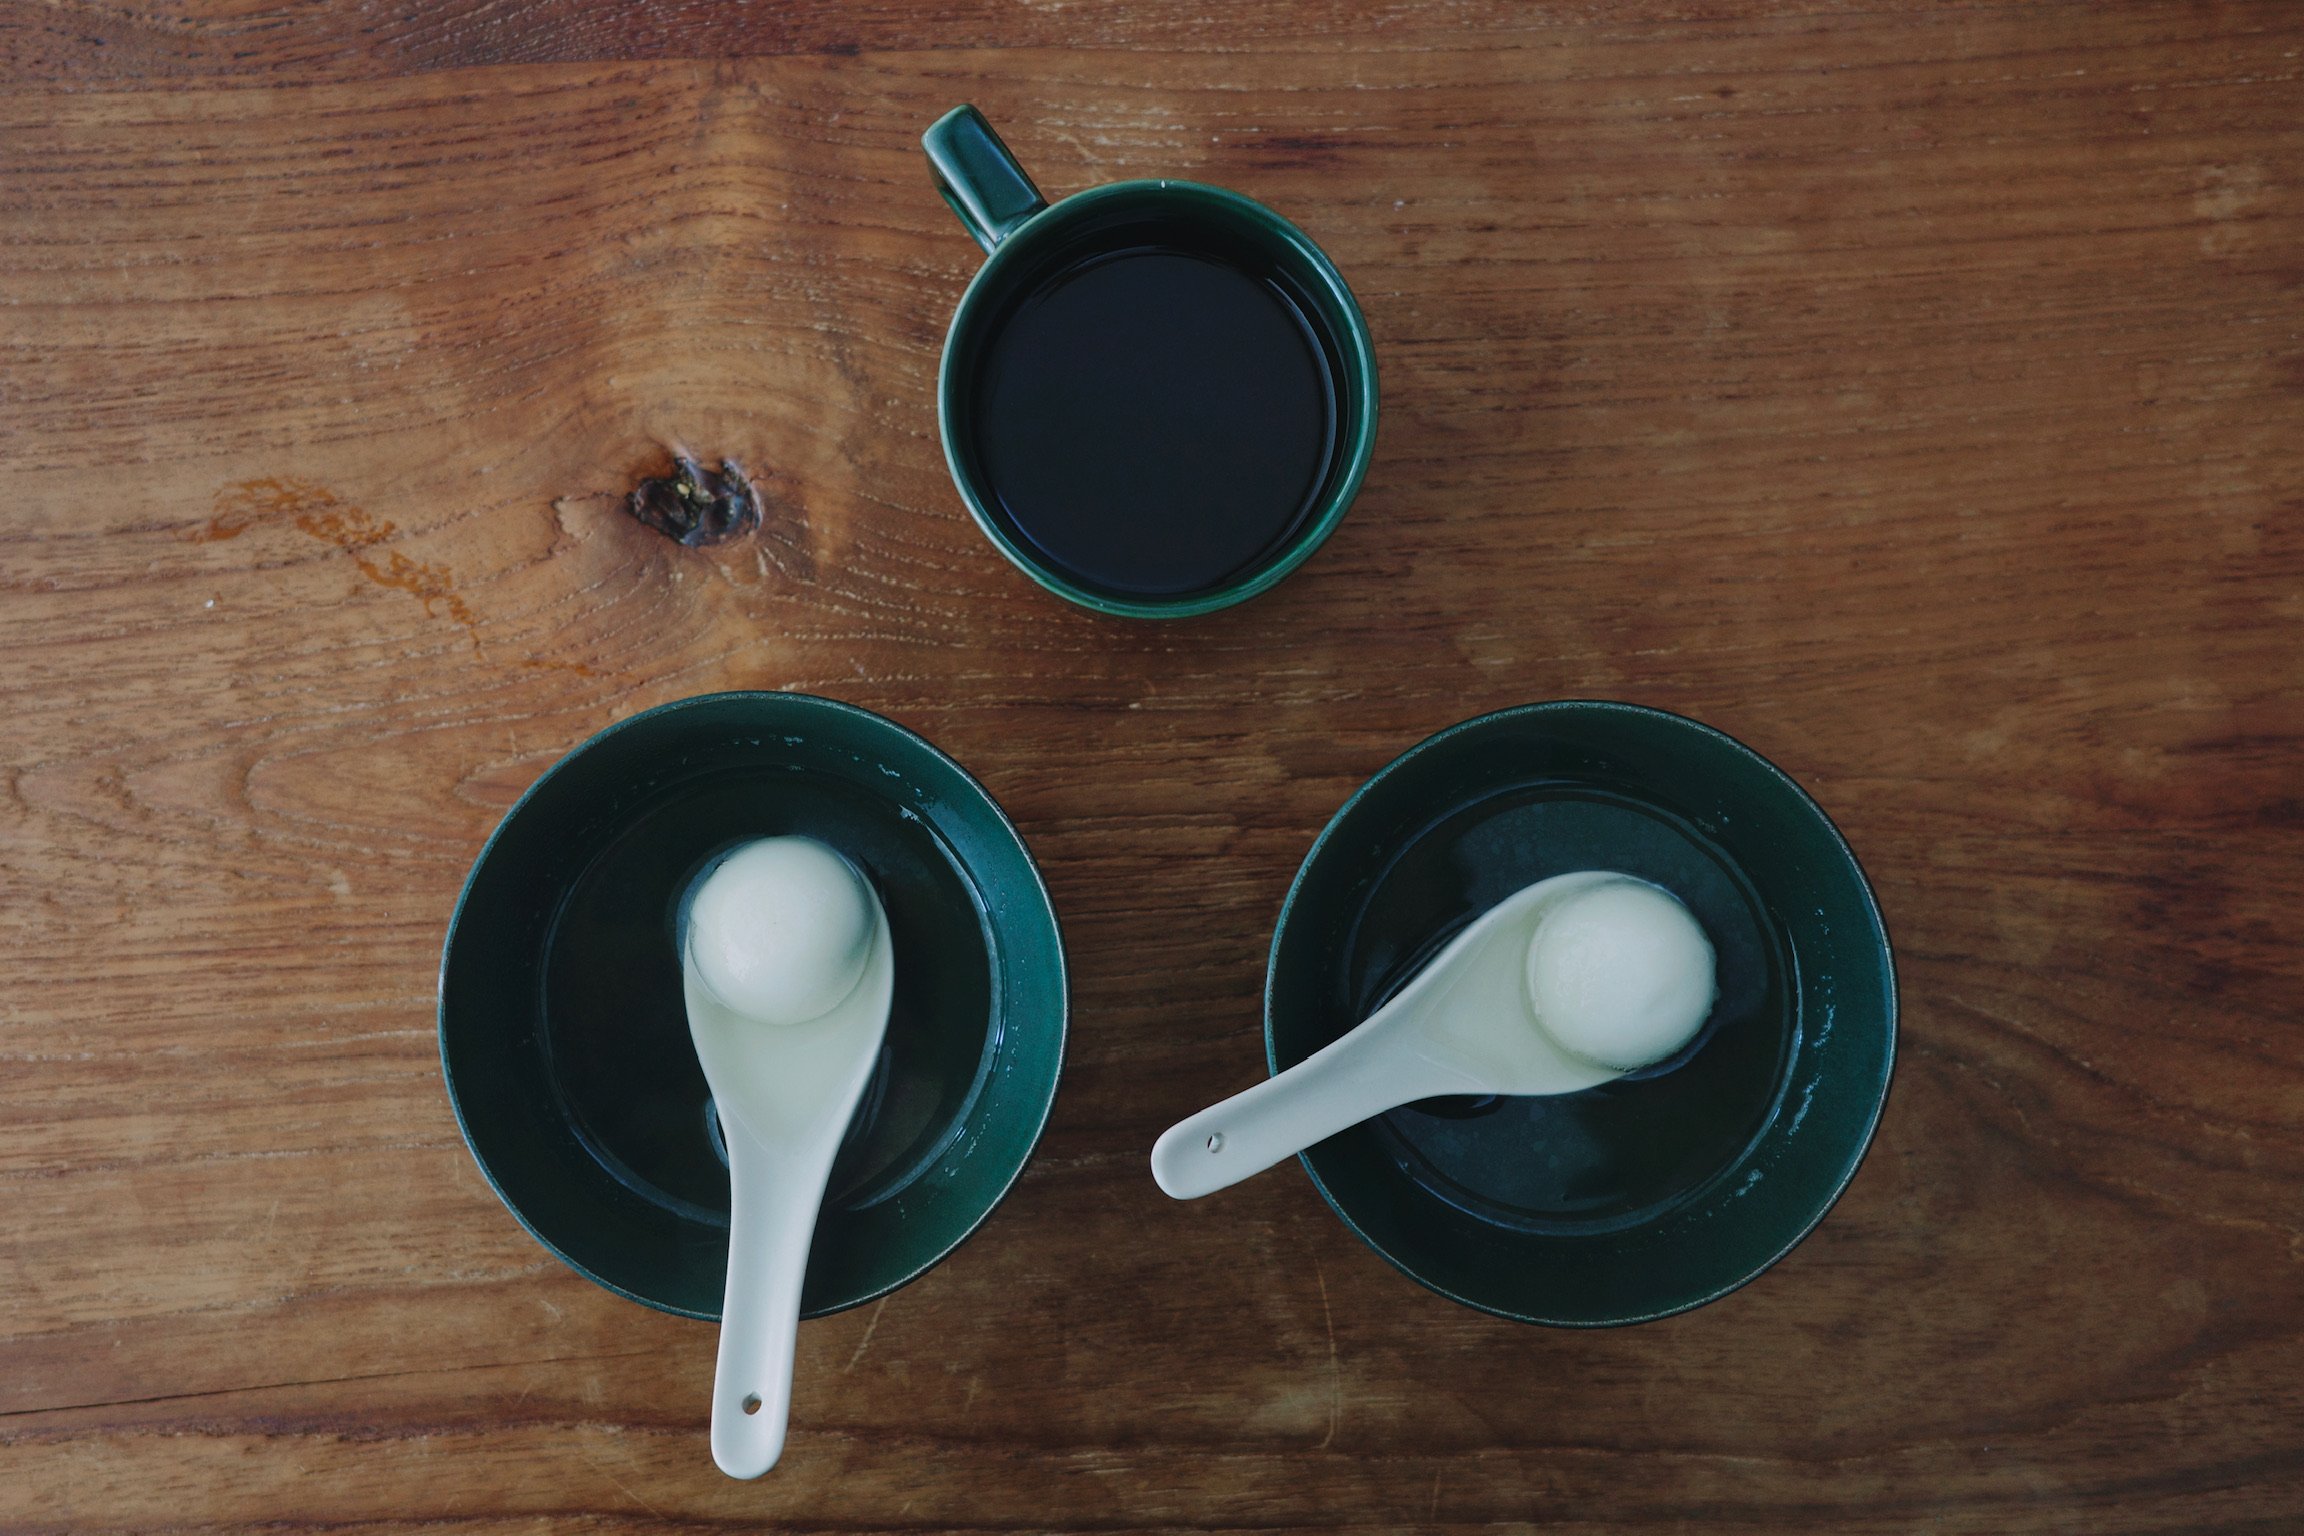 Two green bowls each with one sweet rice dumpling in a white spoon, and a green mug with black coffee. All on a wooden table.